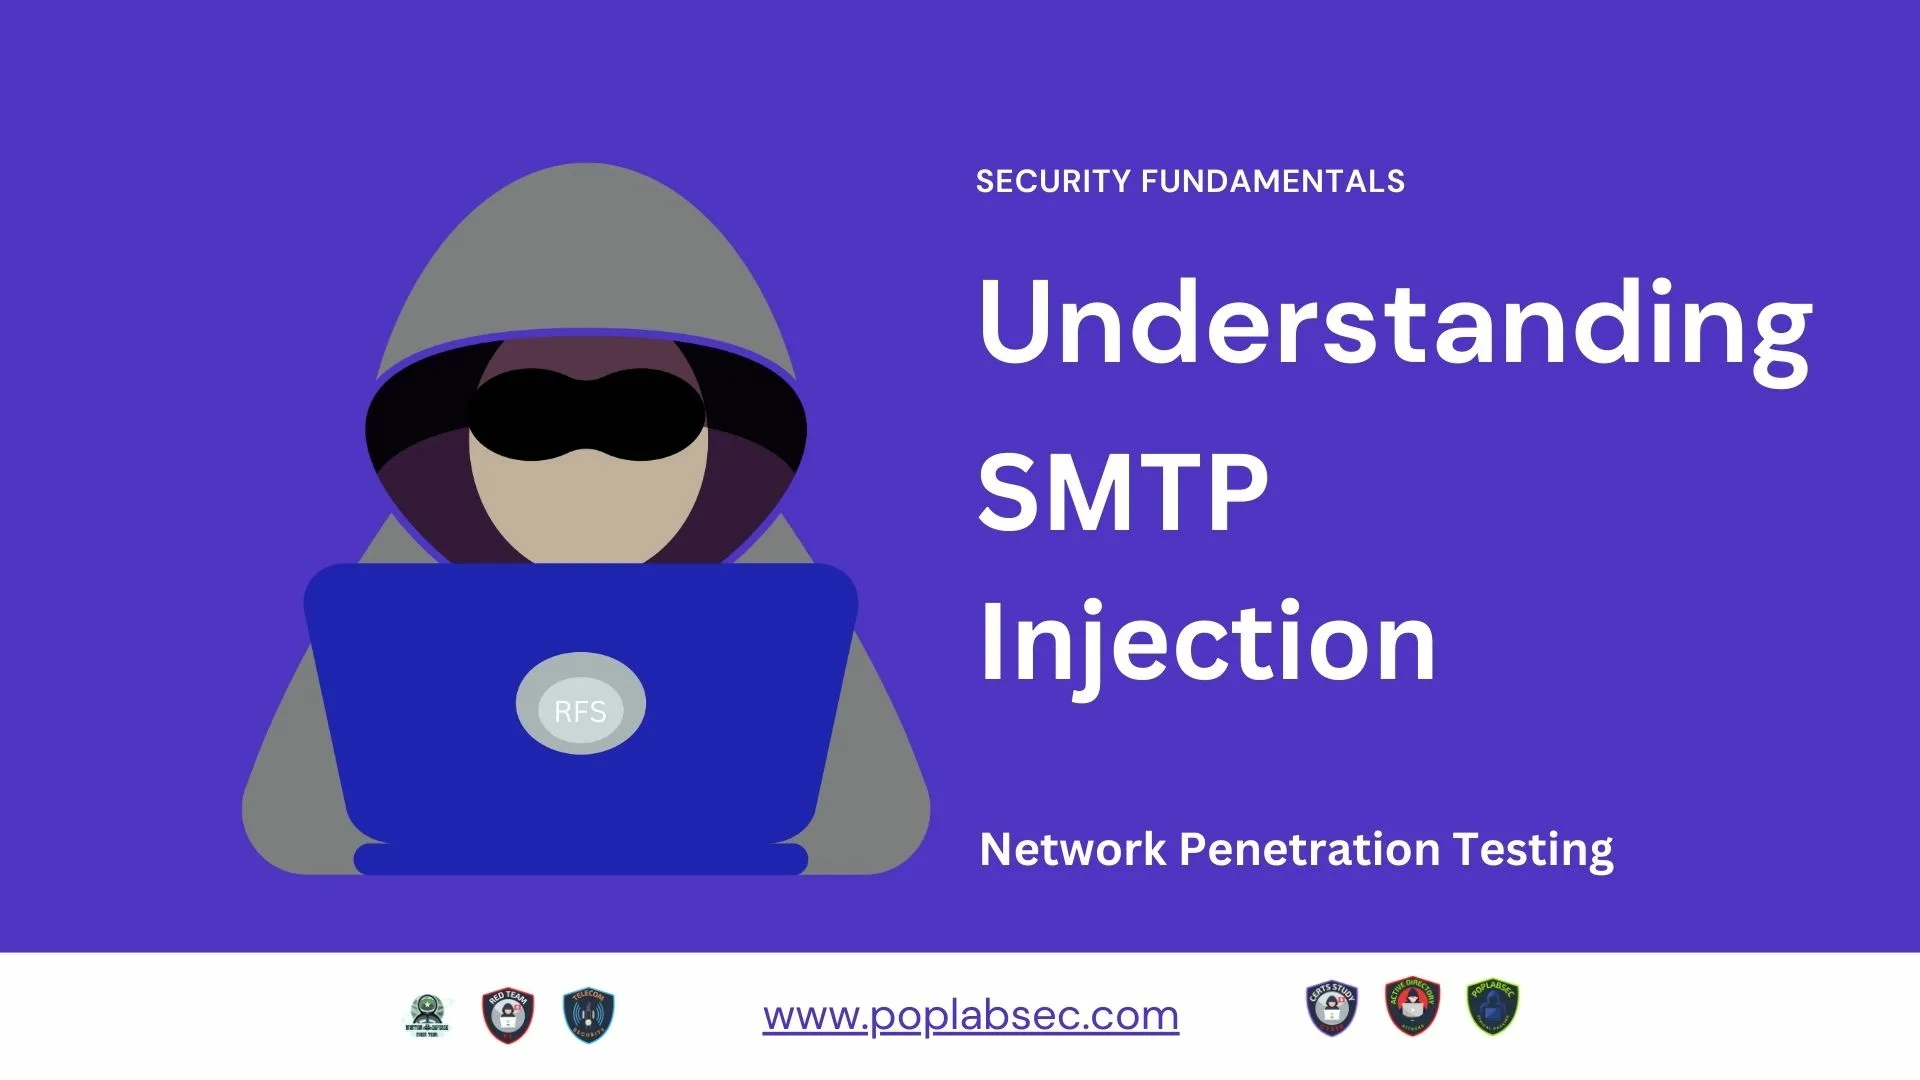 SMTP Injection